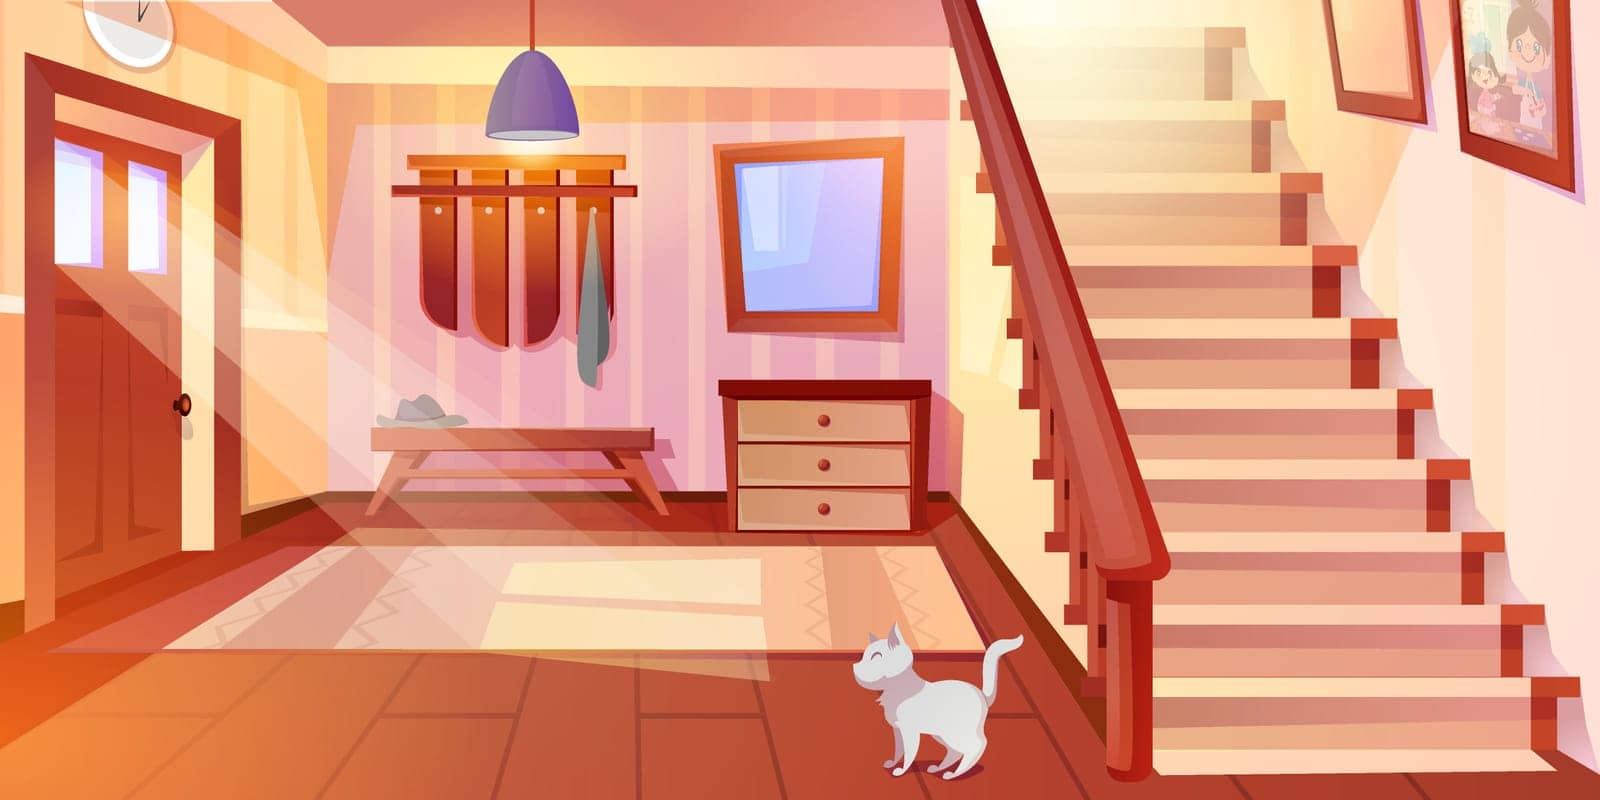 Cartoon house hallway entrance interior with wooden stairs and furniture by Redgreystock